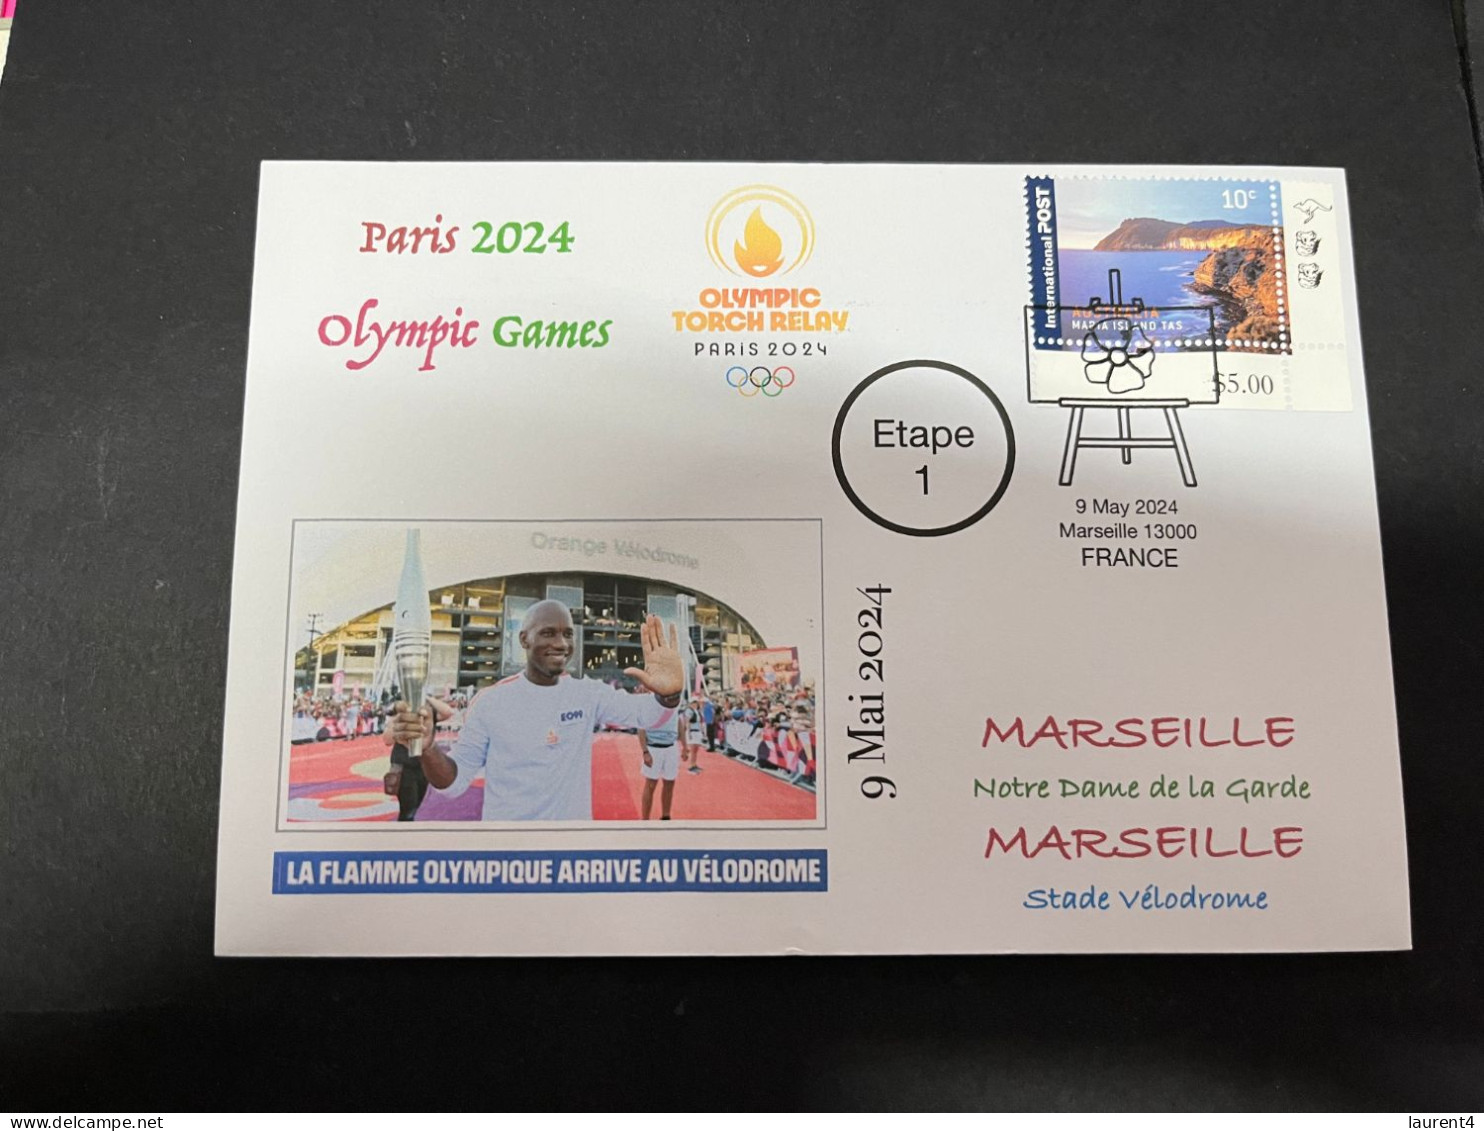 10-5-2024 (4 Z 37) Paris Olympic Games 2024 - Torch Relay (Etape 1) In Marseille (9-5-2024) With OZ Stamp - Zomer 2024: Parijs